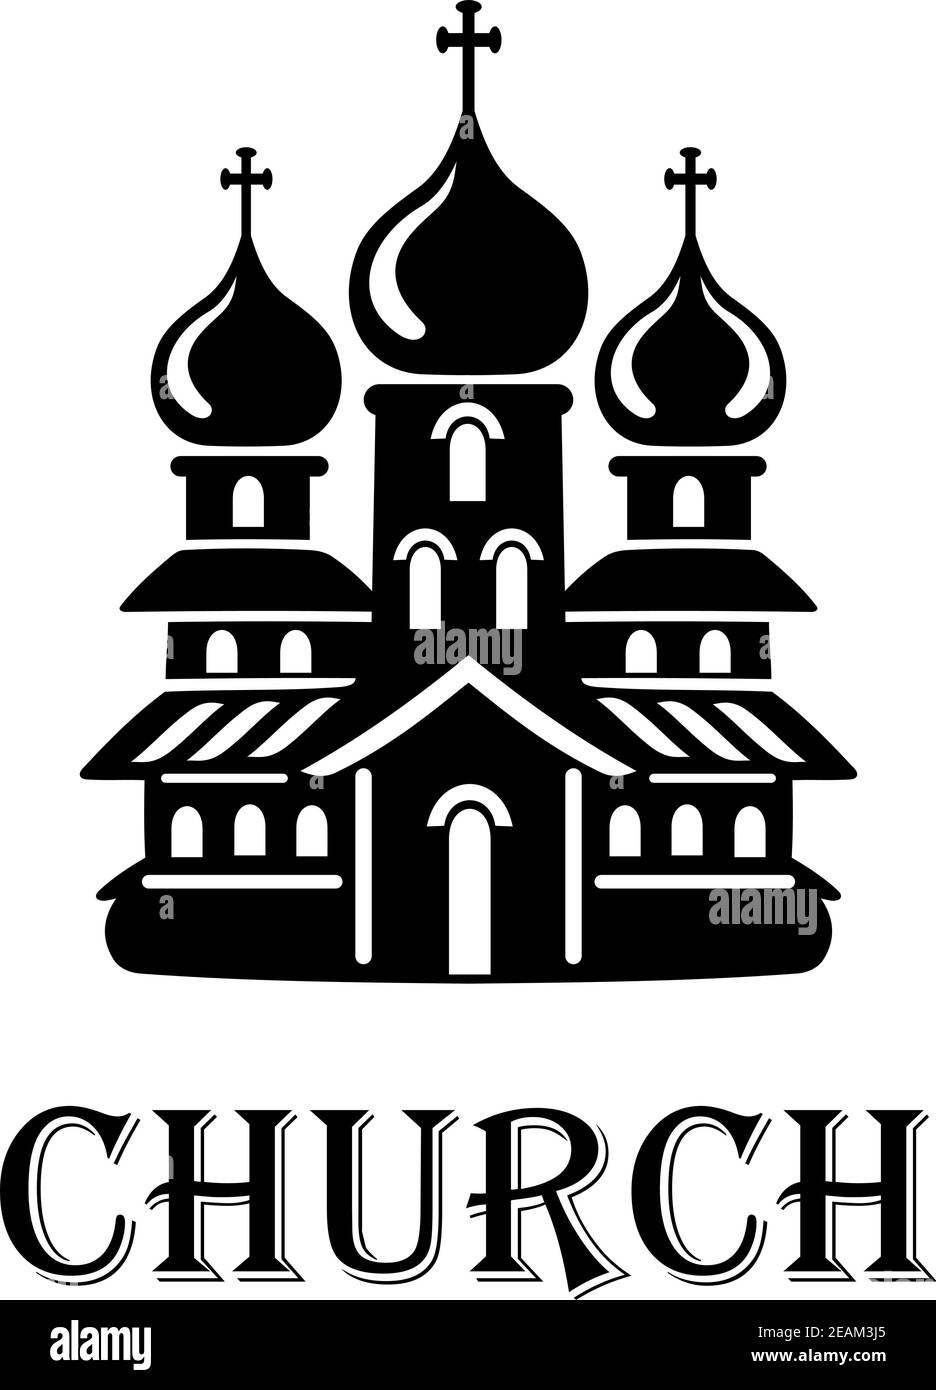 Black and white church icon with the front facade of a church with three onion domes with crosses and the word - Church - below Stock Vector